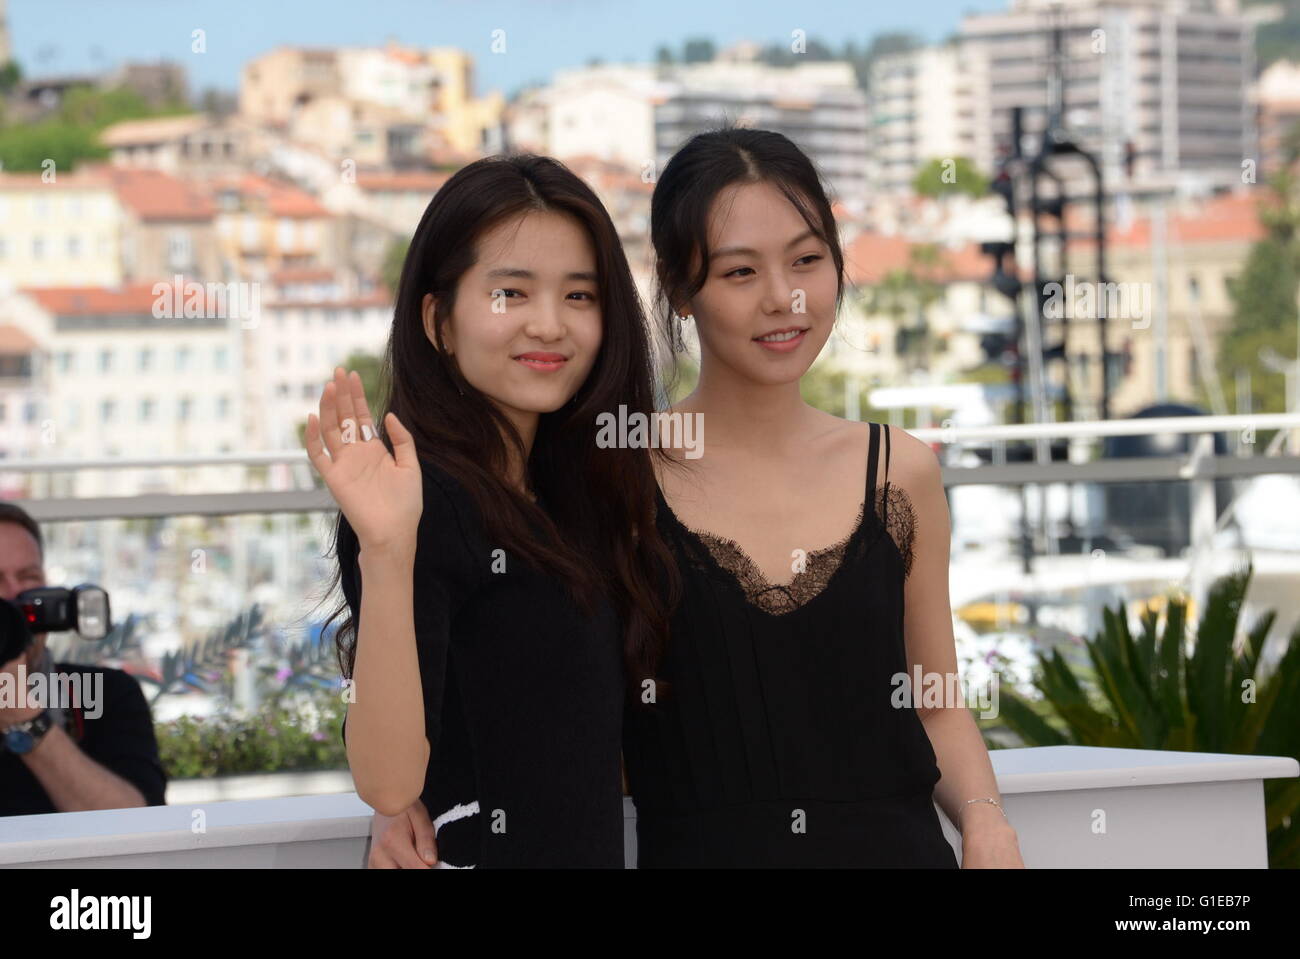 Cannes, France. 11th May, 2016. CANNES, FRANCE - MAY 14: Kim Tae-Ri, Kim Min-Hee attend the 'Mademoiselle (Agassi, The Handmaiden)' - Photocall at the annual 69th Cannes Film Festival at Palais des Festivals on May 14, 2016 in Cannes, France. © Frederick Injimbert/ZUMA Wire/Alamy Live News Stock Photo